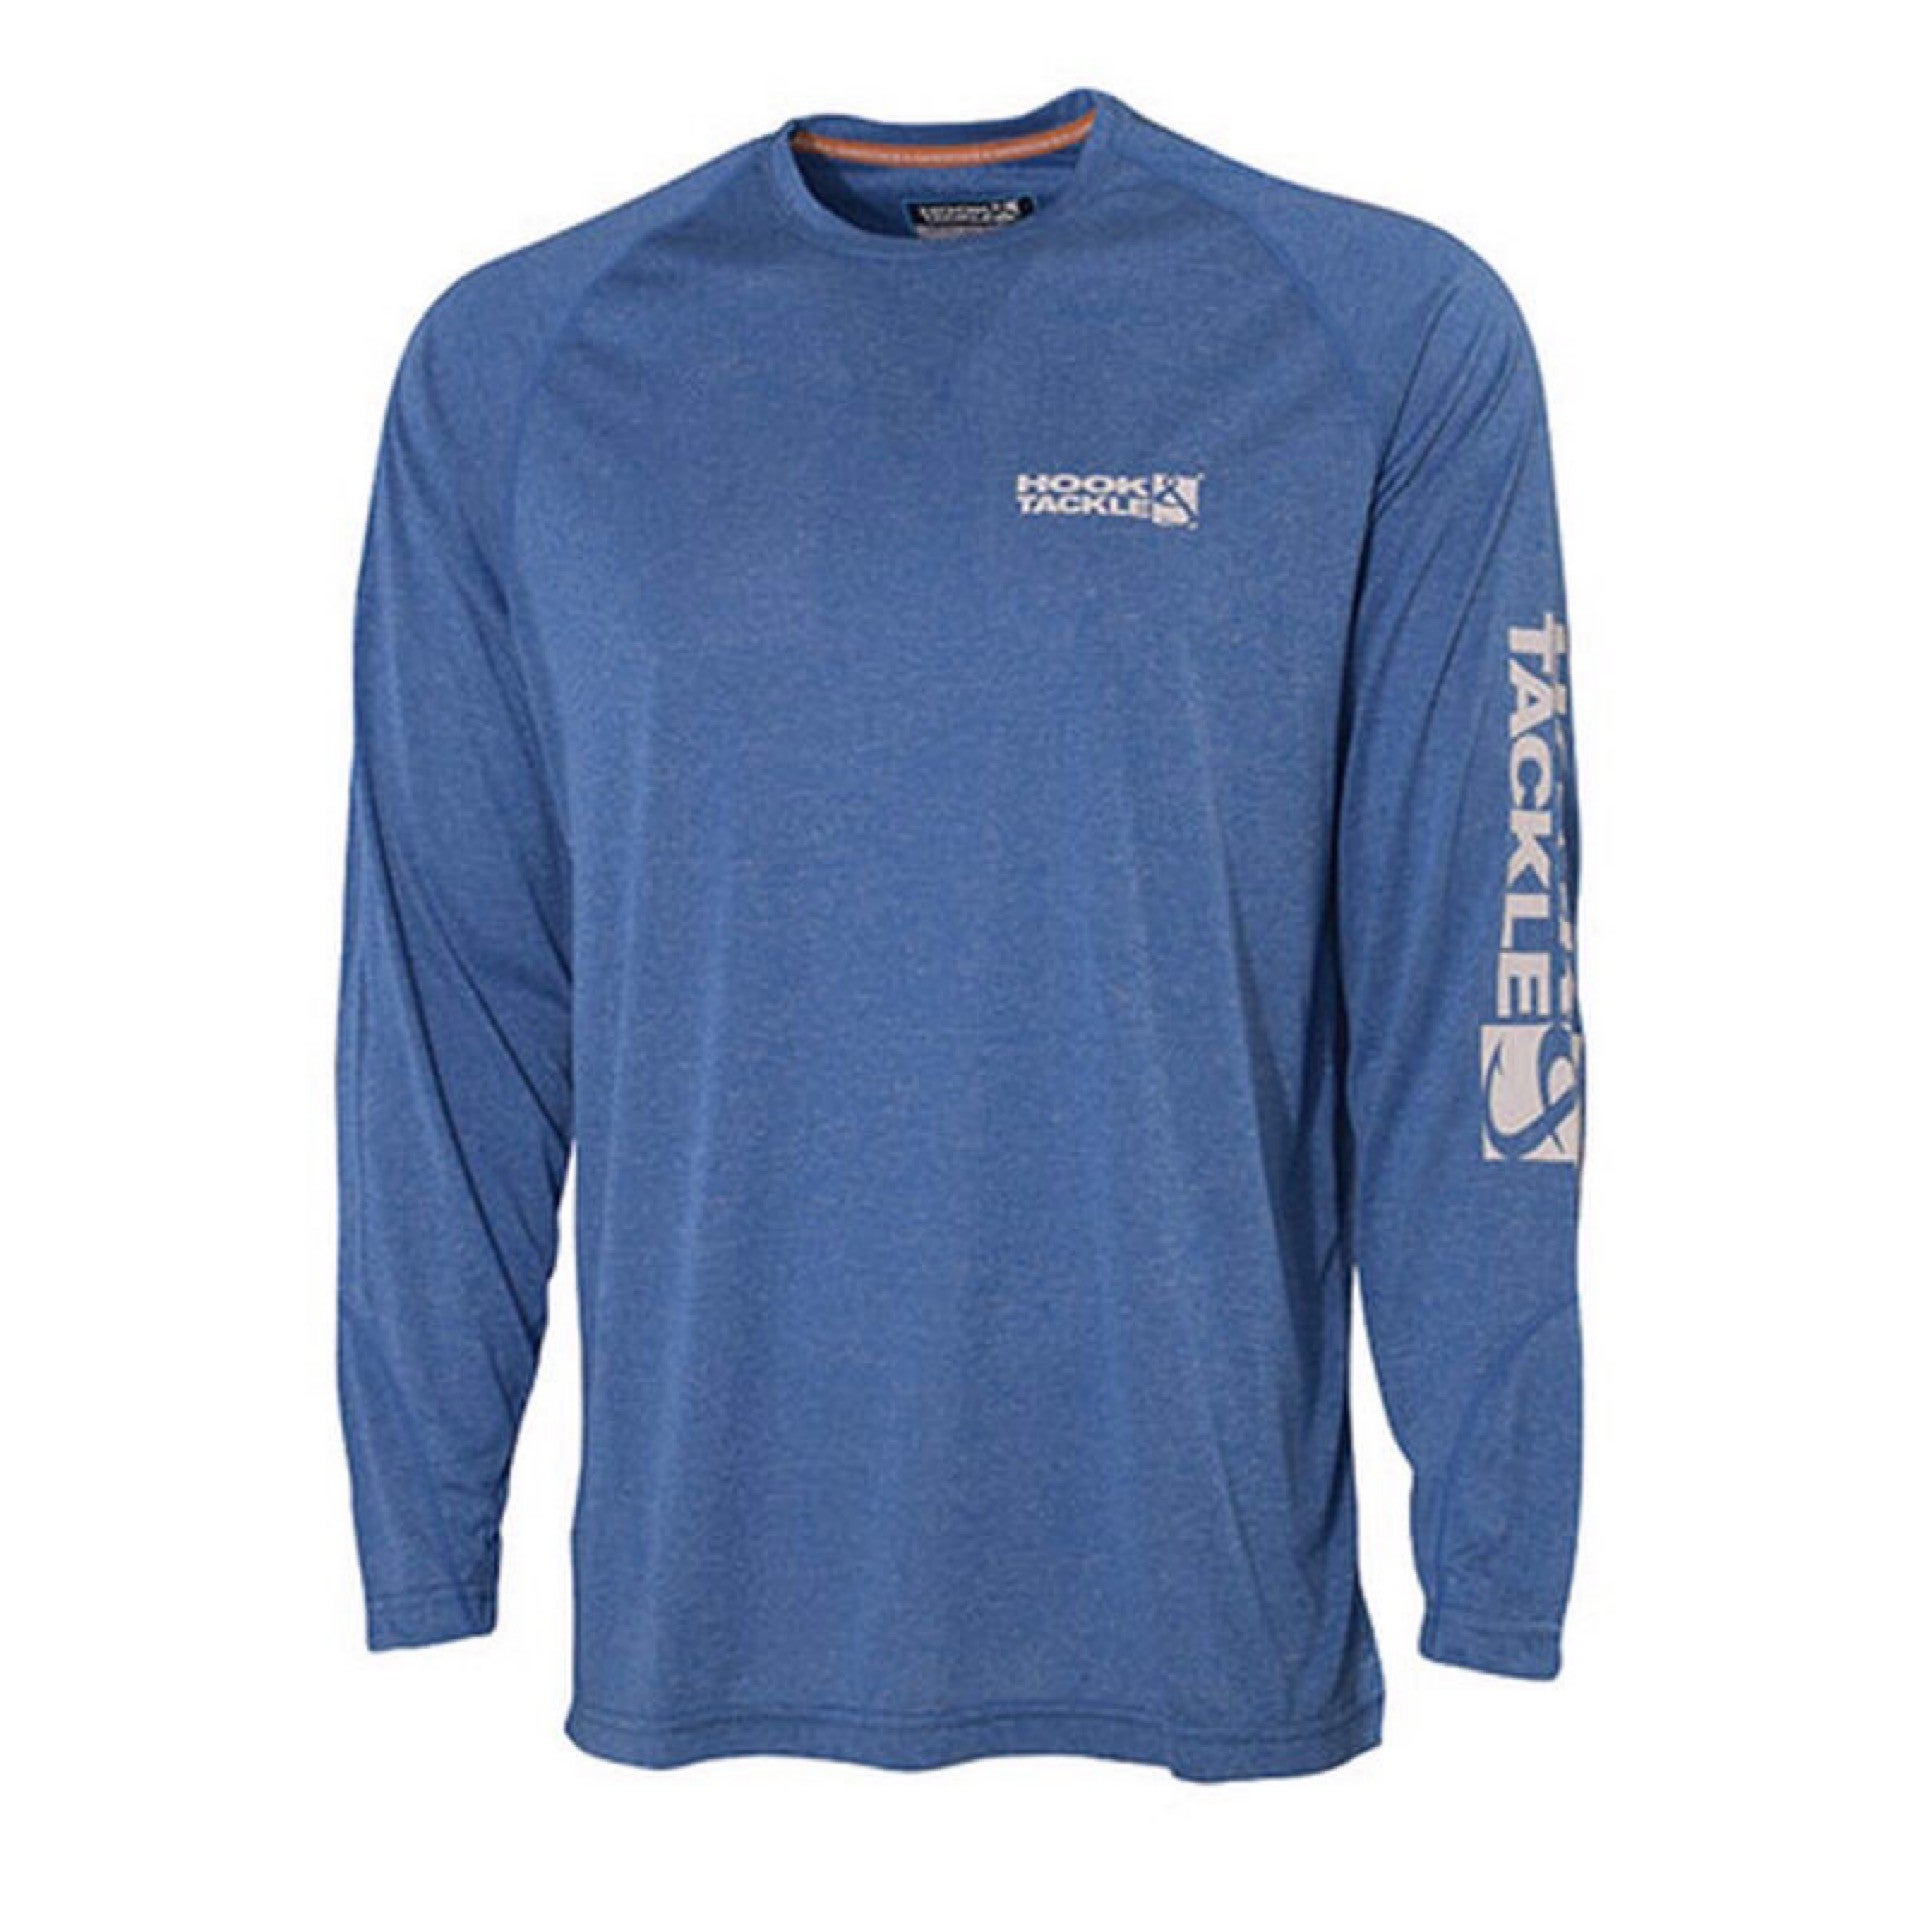 SEAMOUNT BLUE HEATHER WICKED DRY & COOL FISHING SHIRT